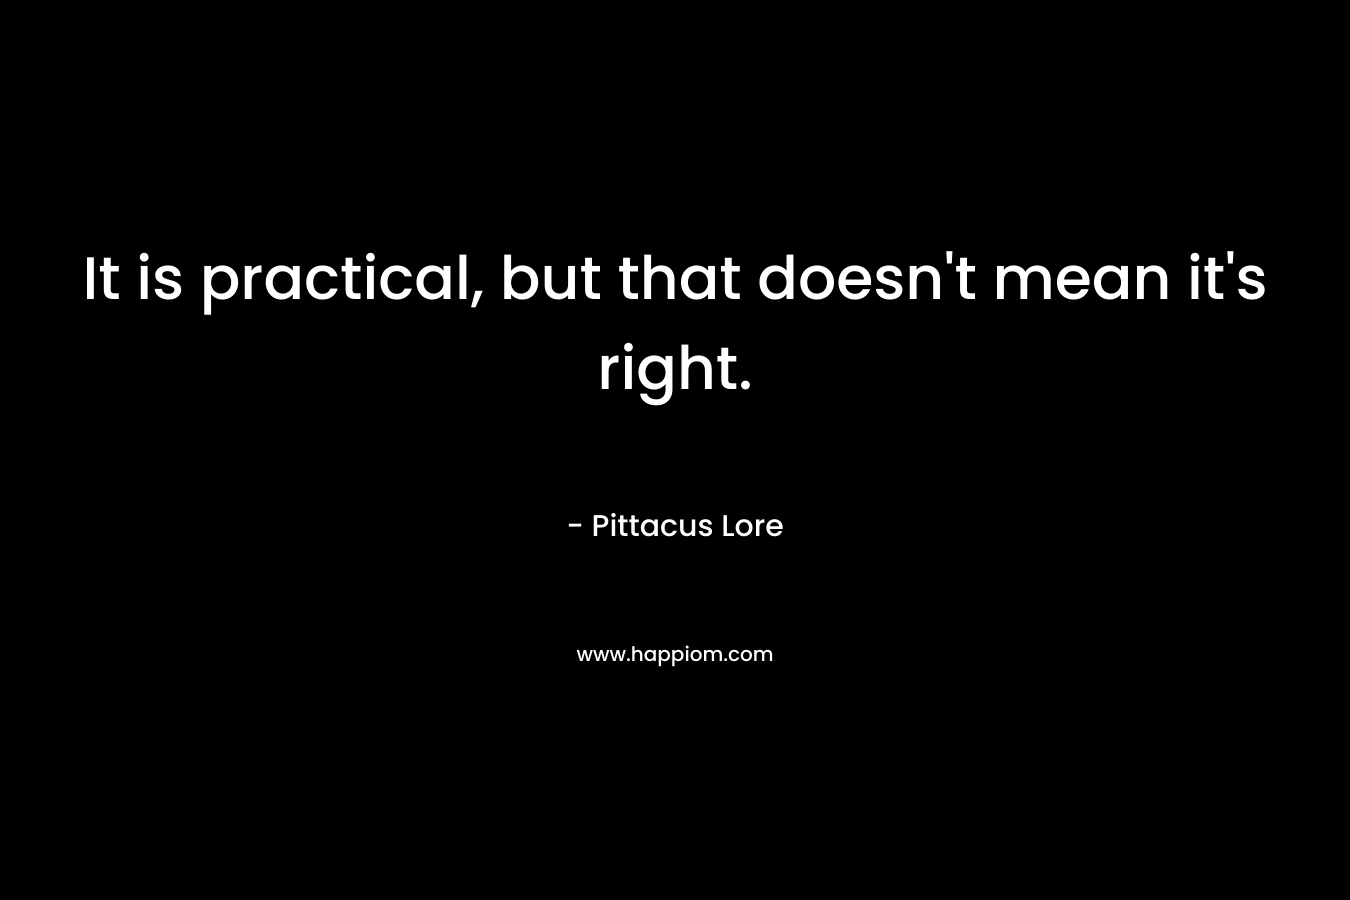 It is practical, but that doesn’t mean it’s right. – Pittacus Lore